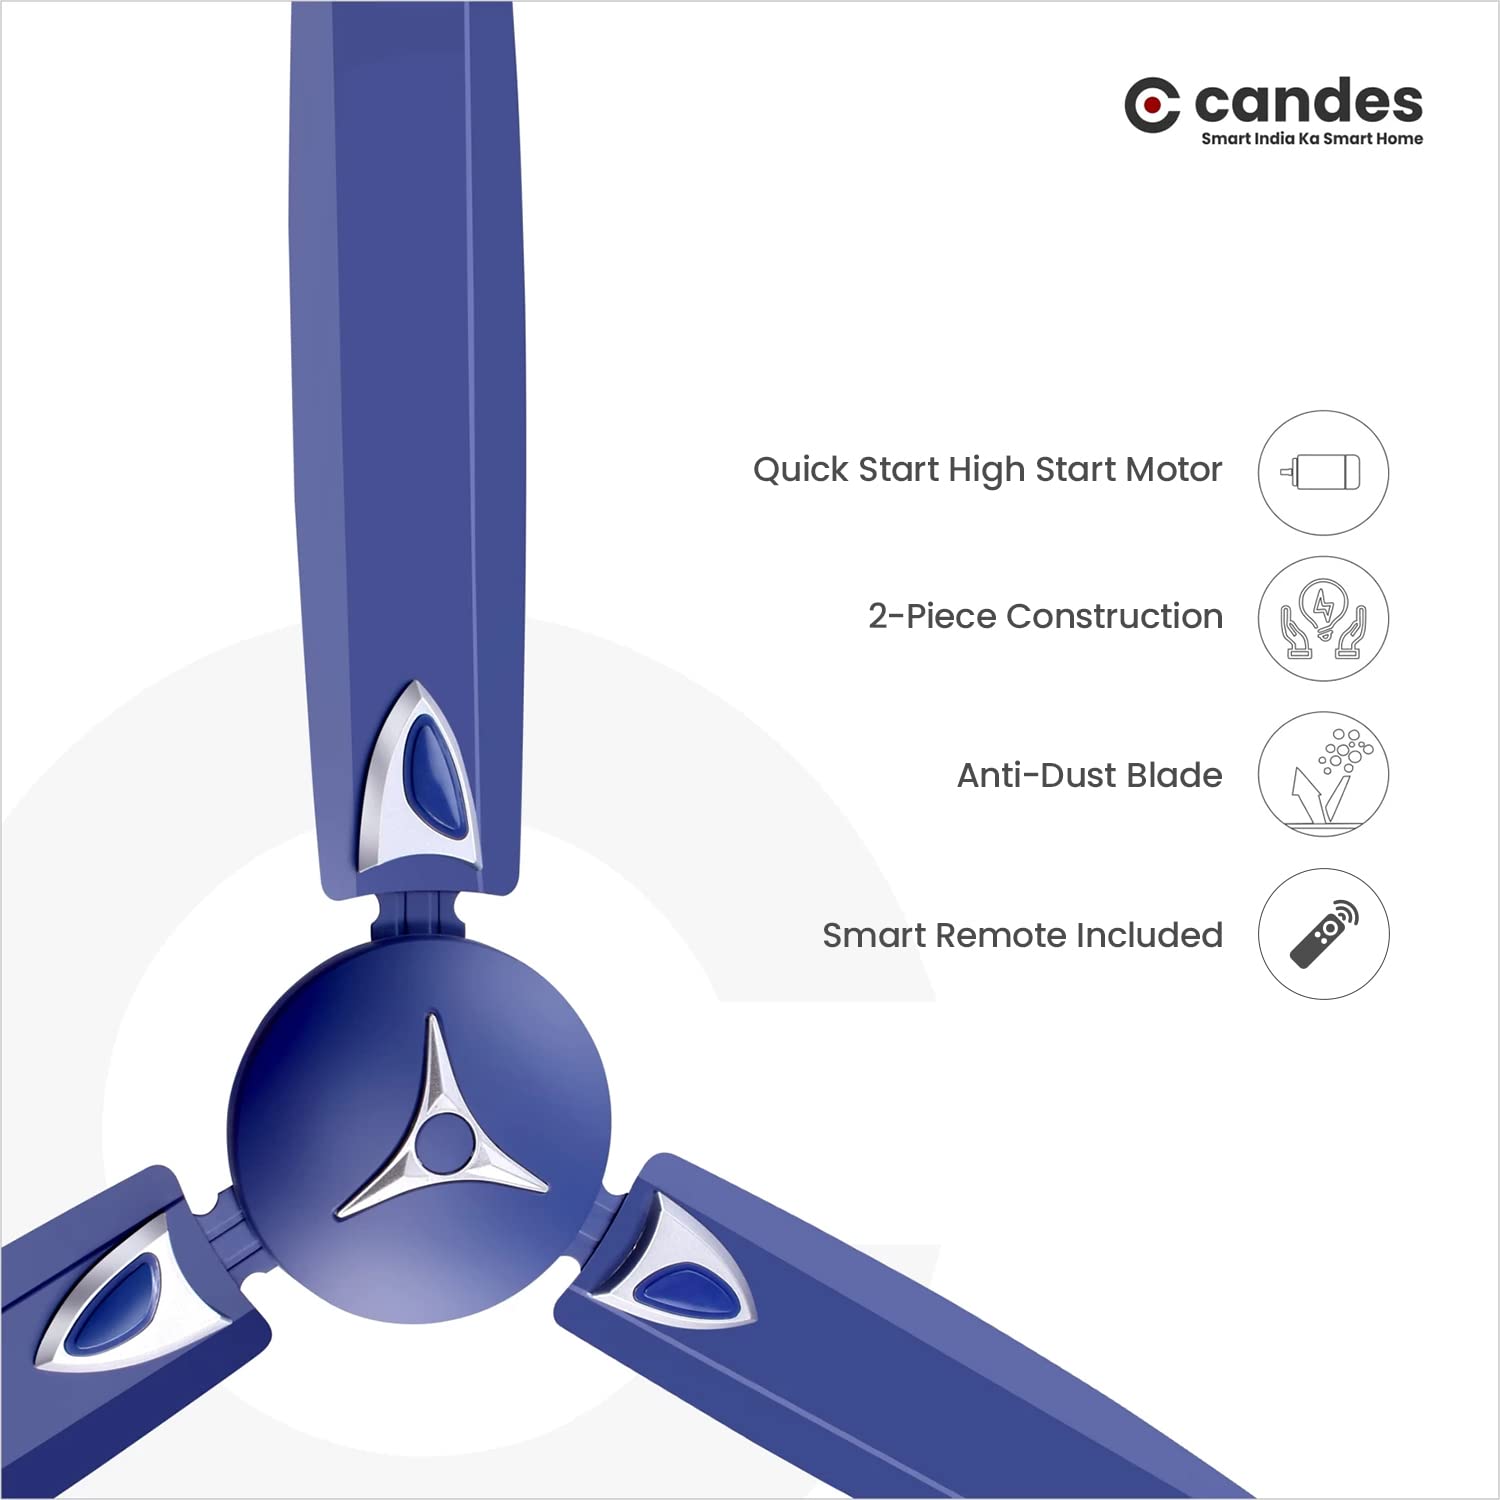 Candes Star 1200mm High-Speed Decorative Remote Ceiling Fans for Home | BEE 3 Star Rated 405 RPM Anti-Dust | 2 Years Warranty (Silver Blue) Pack of 1